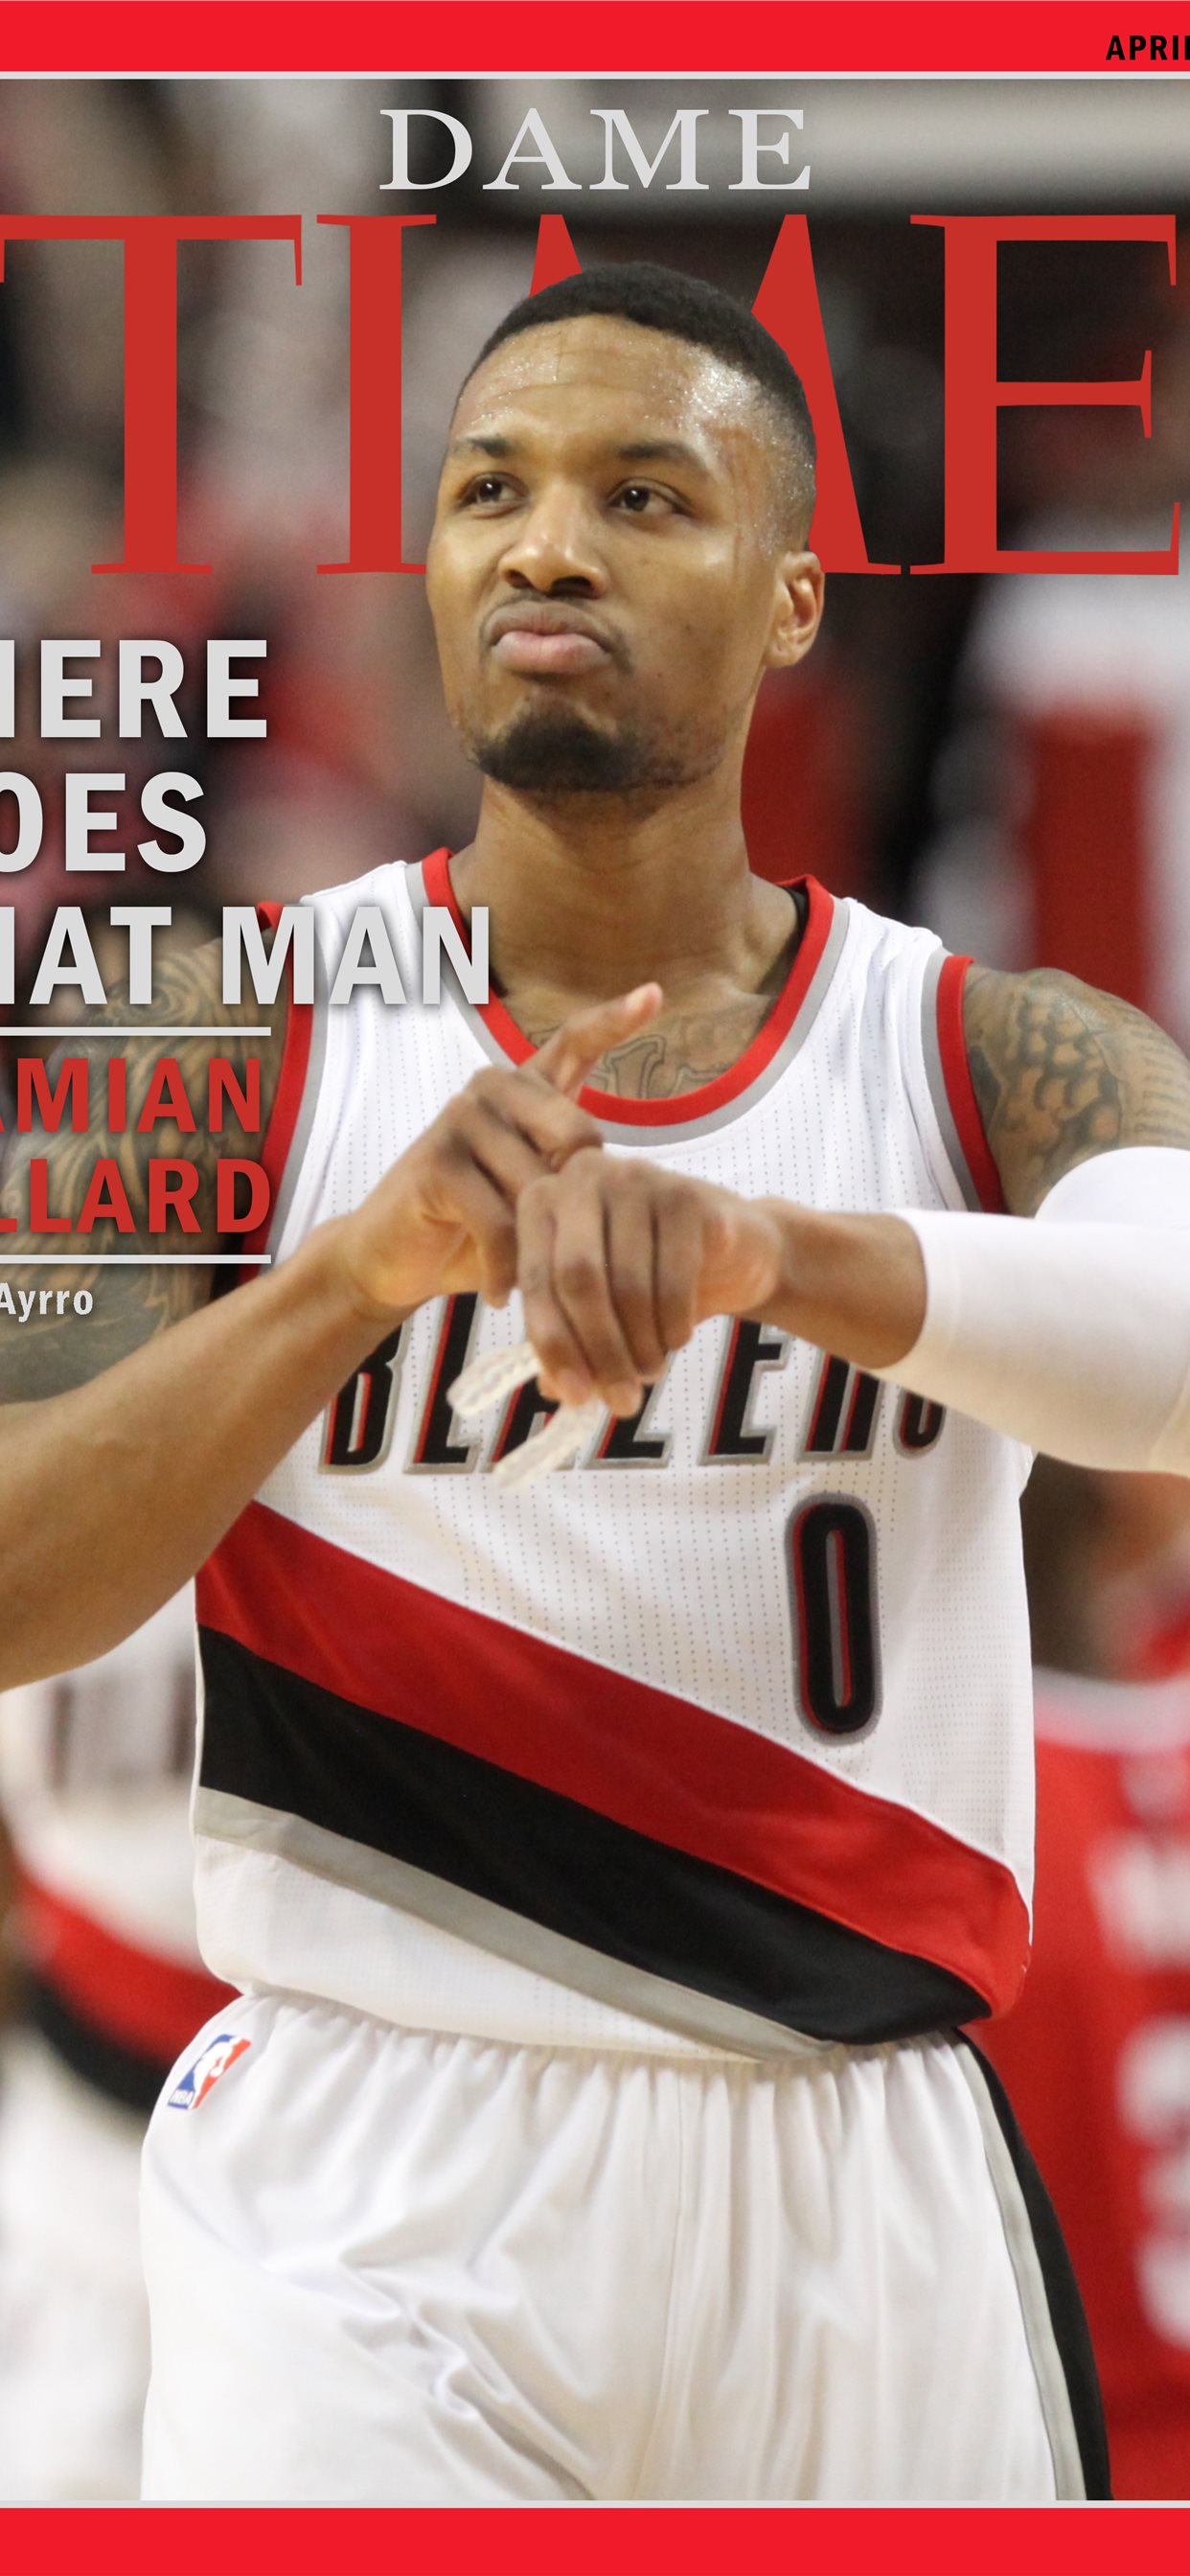 How Damian Lillard Became an Allstar and Made History